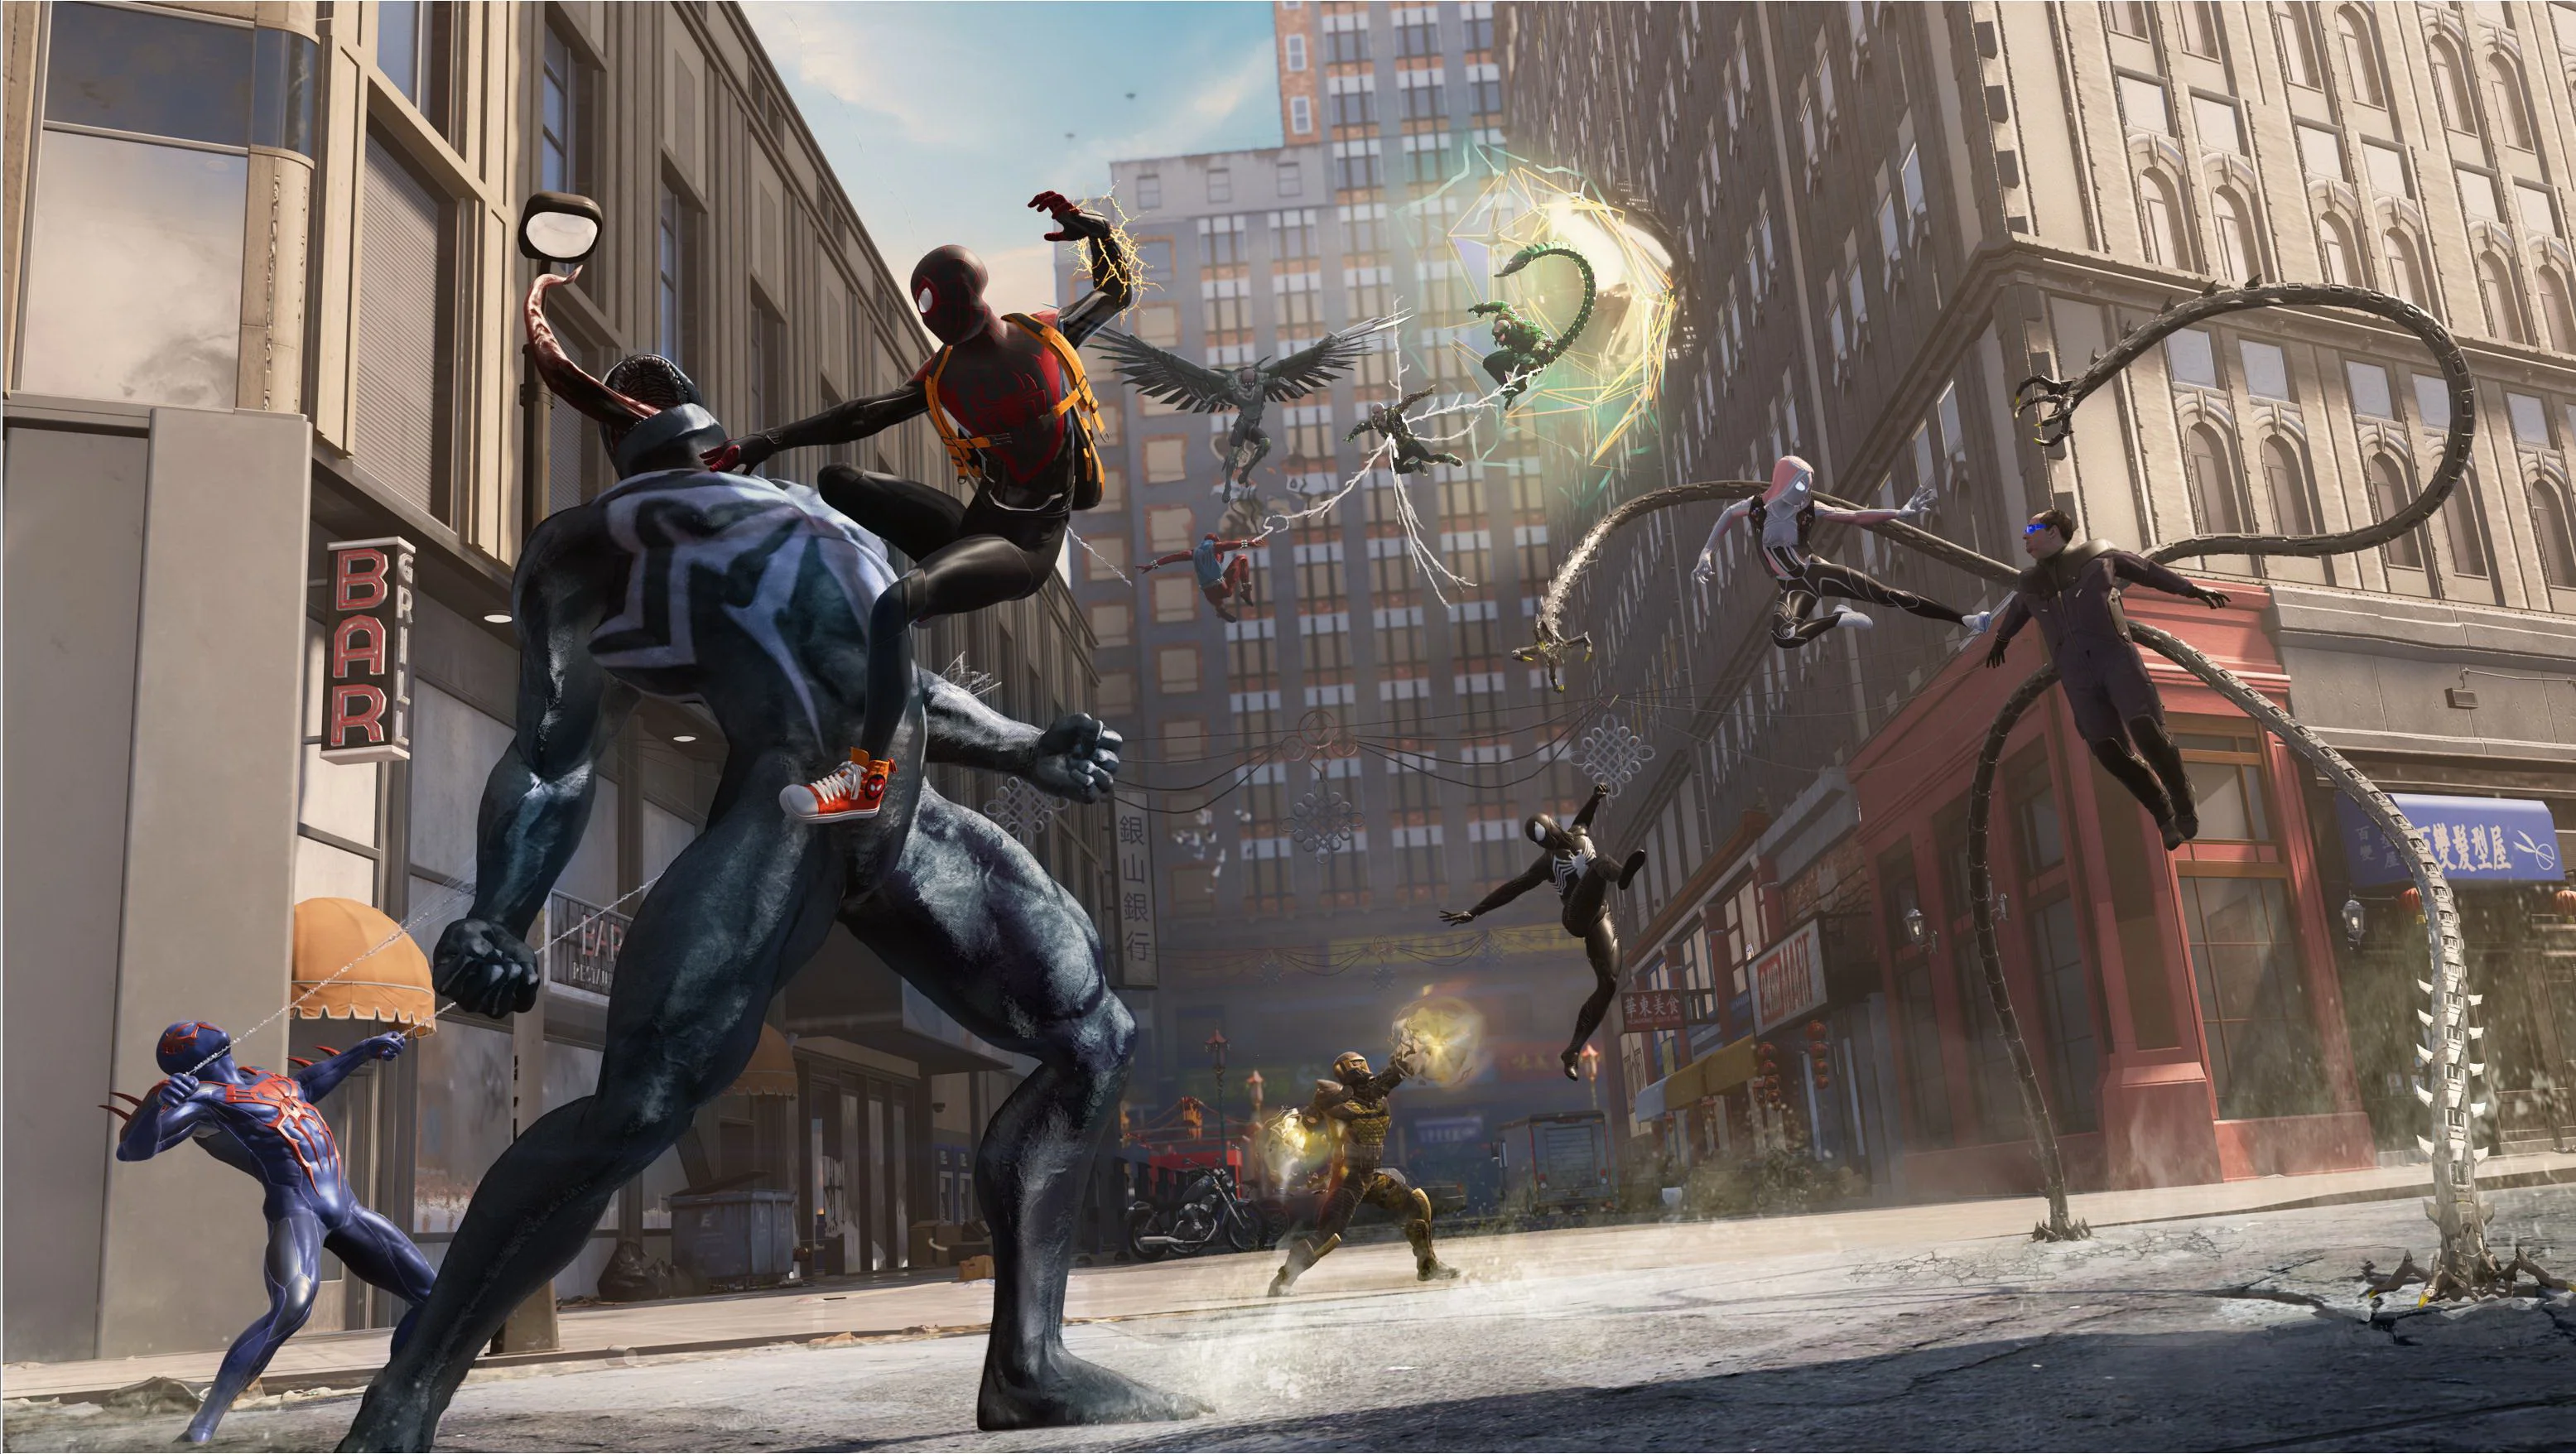 The developers of Marvel's Spider-Man wanted to make multiplayer like GTA Online